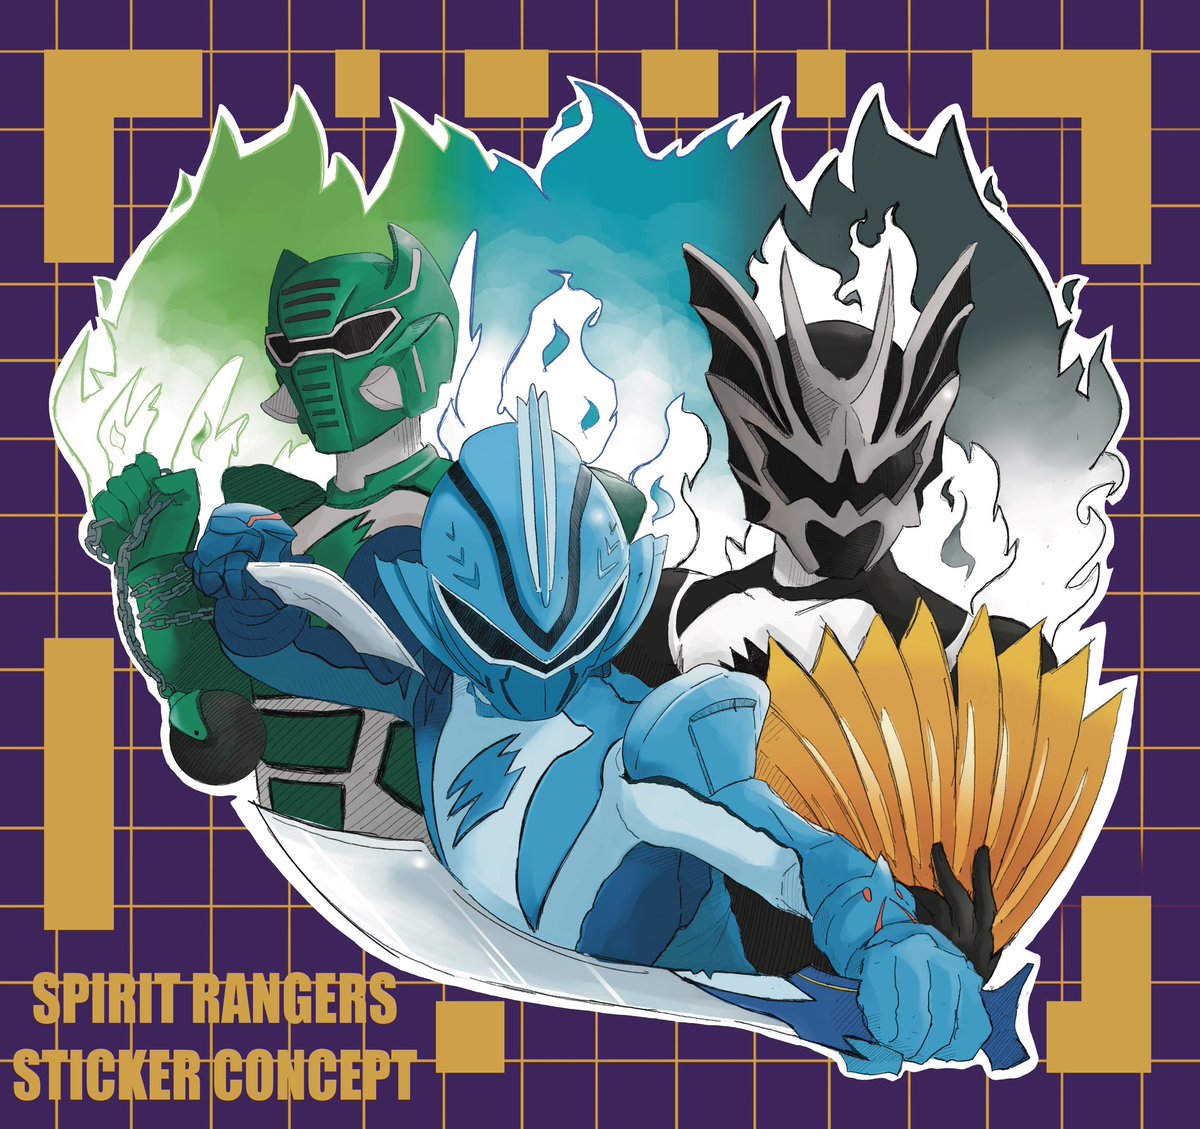 Been on a Jungle Fury kick, here’s a sticker concept. It may just become a reality!

#PowerRangers #sentai #Tokusatsu #PowerRangers30 #junglefury #morphintime